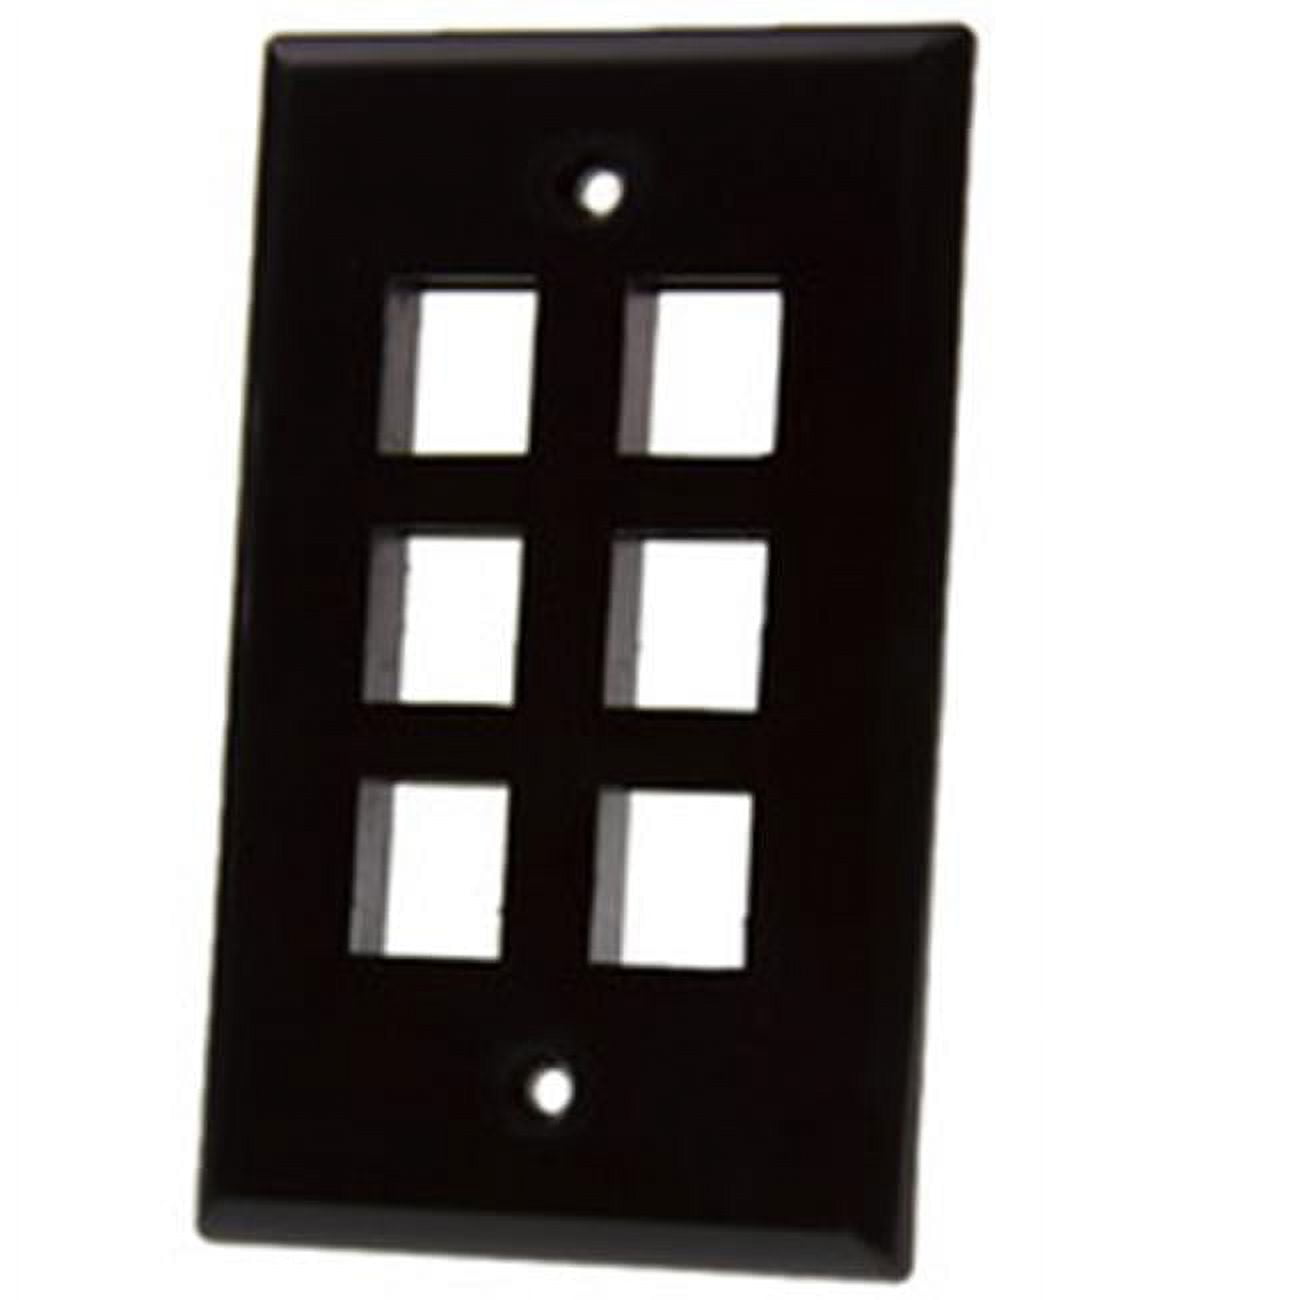 Picture of CableWholesale 3012-02206 6 Port Single Gang Keystone Wall Plate, Black